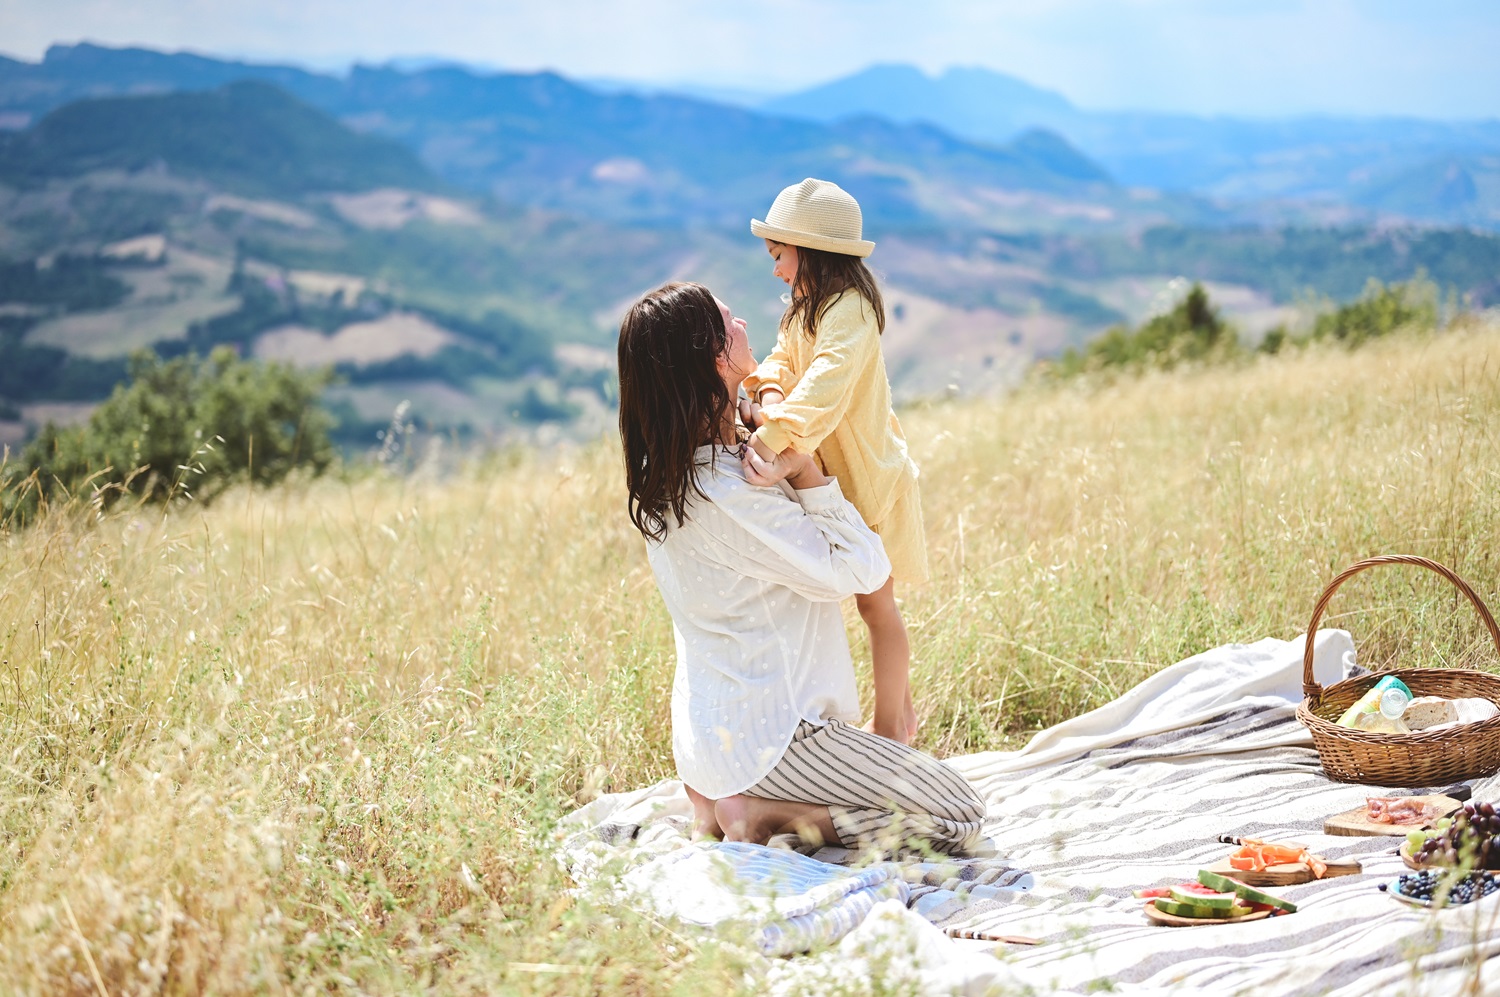 Mother embracing daughter on a picnic outdoors in Hills.